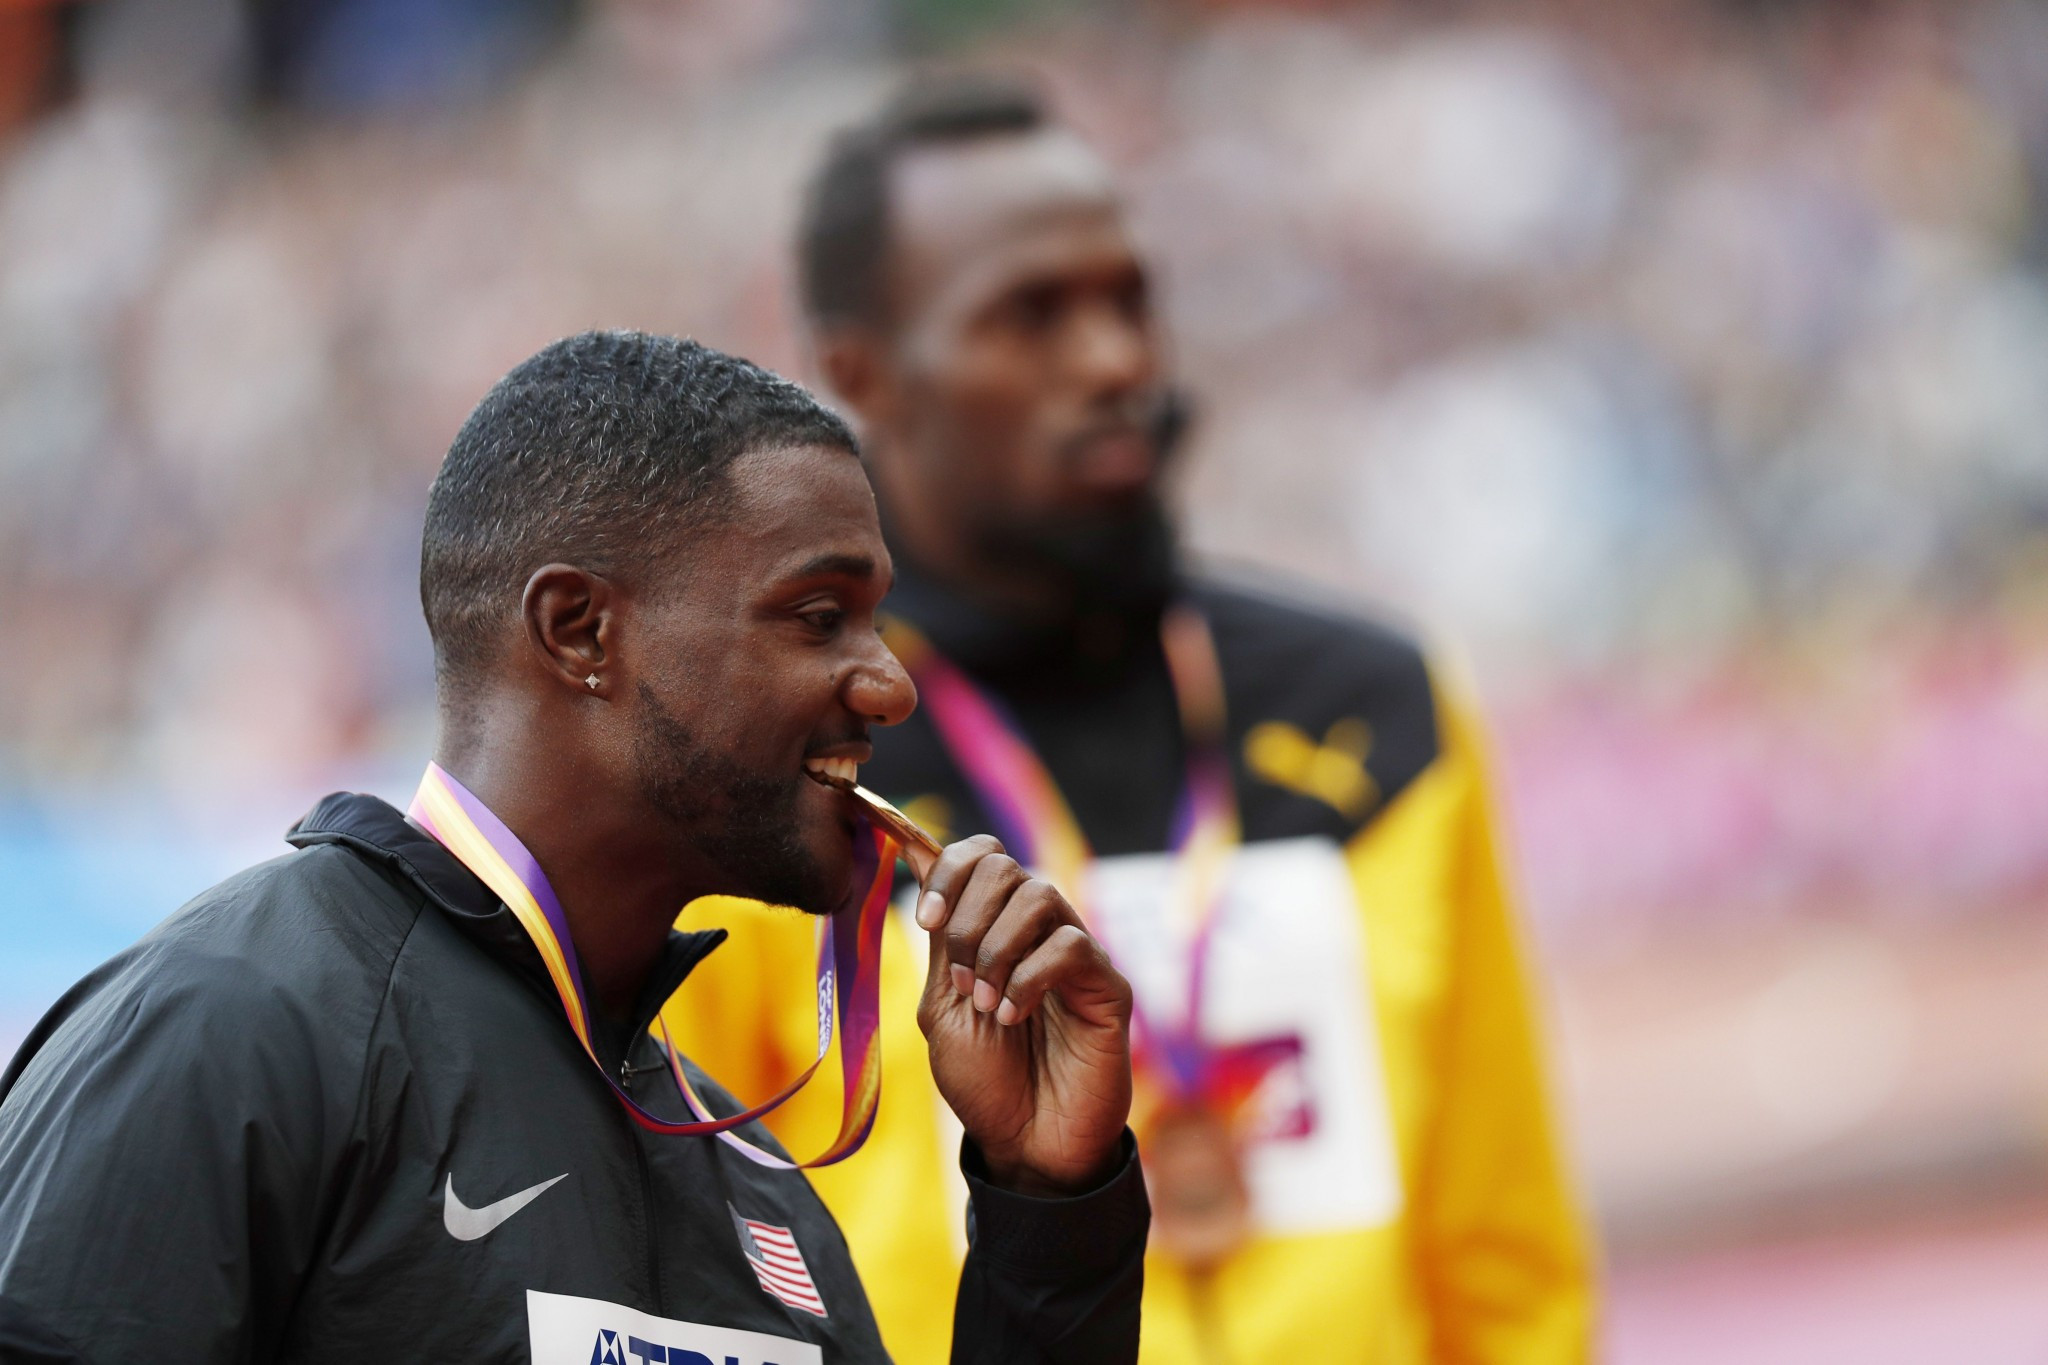 Justin Gatlin ripped up the Hollywood movie script on Saturday as he beat Usain Bolt to gold ©Getty Images